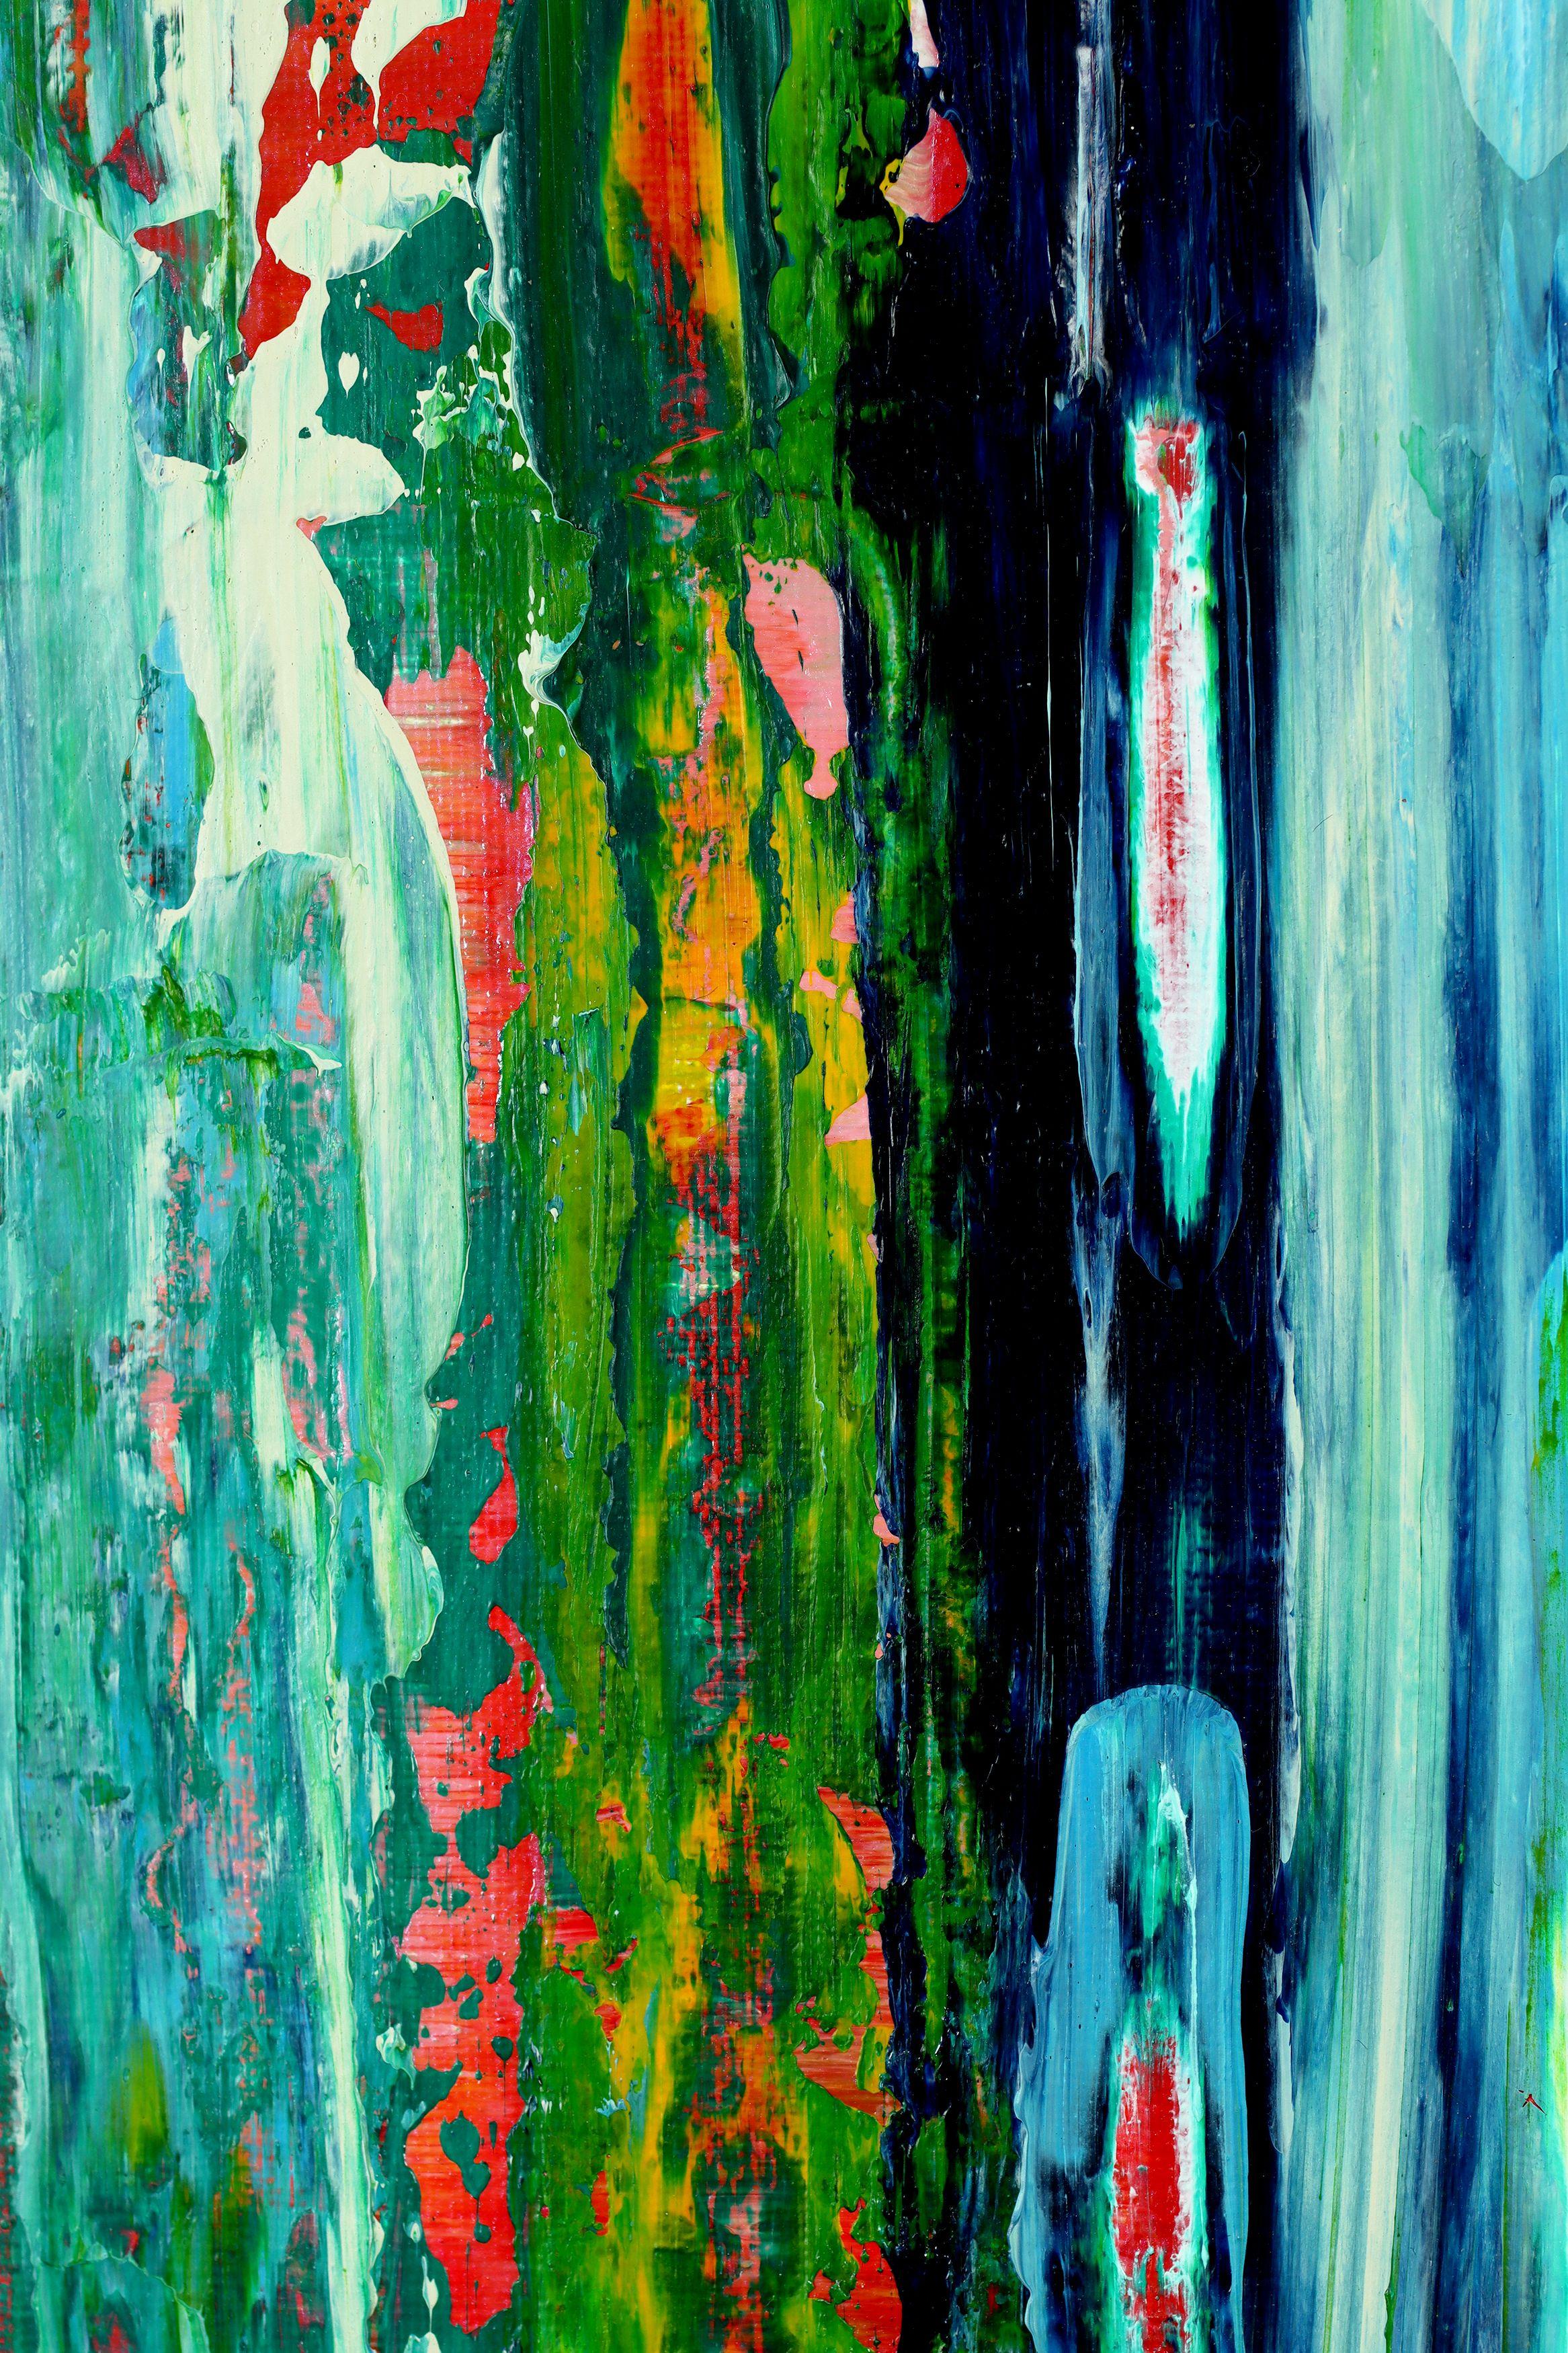 abstract painting  acrylic on canvas    This artwork was created layering and blending layers of blue, turquoise, magenta, teal, orange,pink undertones. Signed and ready to hang.    For this work I used a large palette knife and hand mixed acrylic